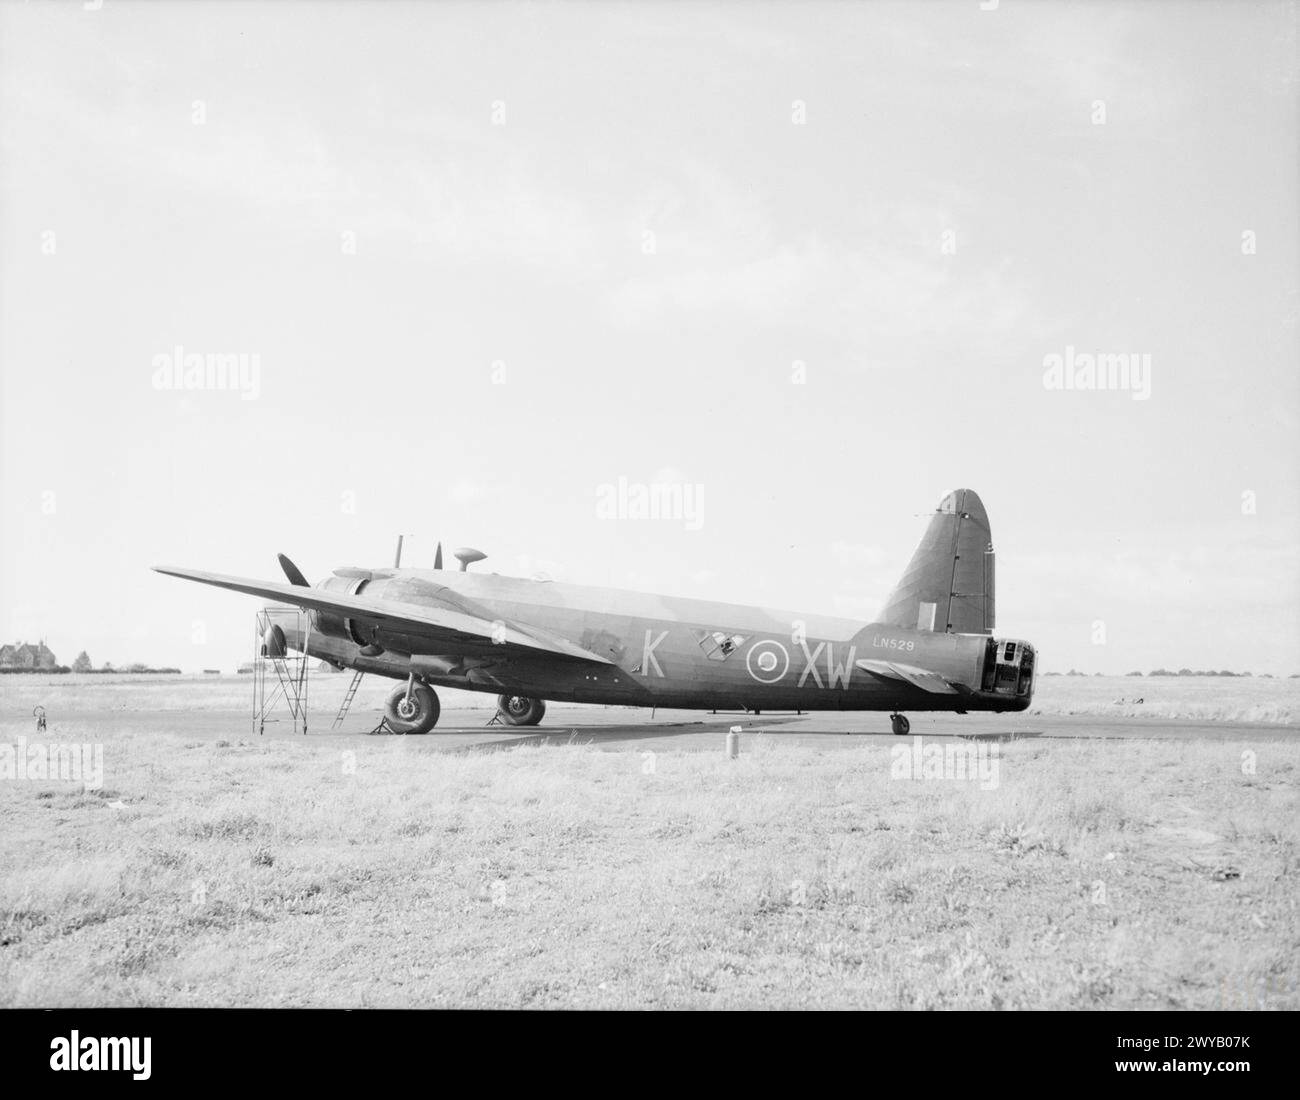 ROYAL AIR FORCE BOMBER COMMAND, 1942-1945. - Vickers Wellington Mark X, LN529 'XW-K', of No. 18 Operational Training Unit based at Finningley, Yorkshire, parked in a dispersal at Mount Farm, Oxfordshire, during engine repairs. , Royal Air Force, 18 Operational Training Unit Stock Photo